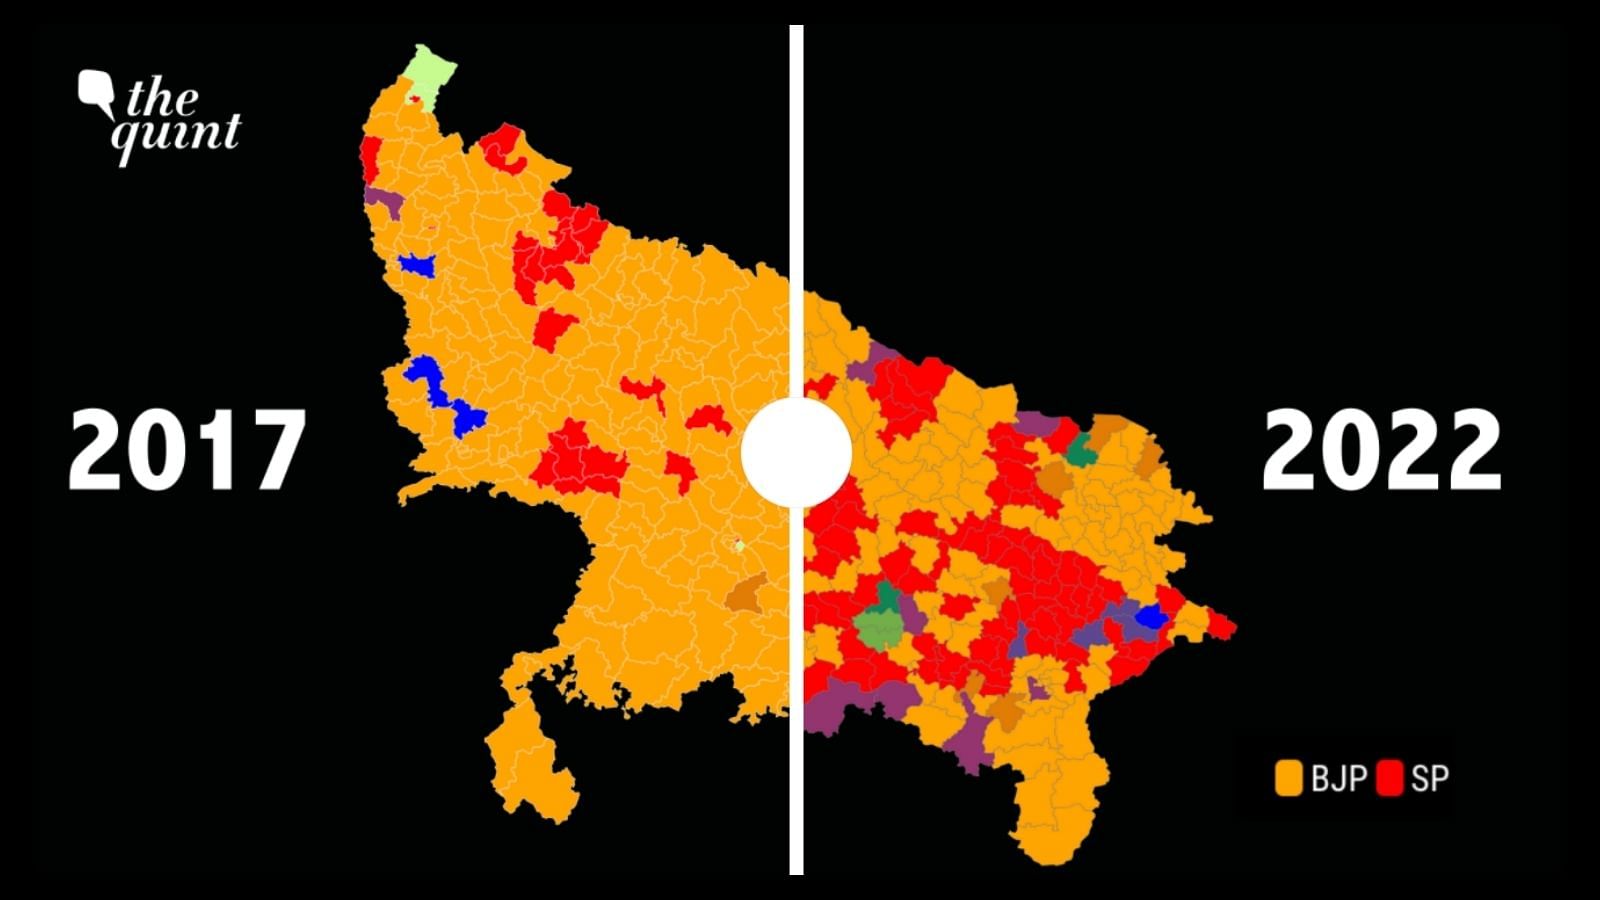 <div class="paragraphs"><p>Out of the seven phases of the UP Assembly polls this year, which are the phases which turned out to be the make-or-break turning points of the election for the BJP and SP?</p></div>